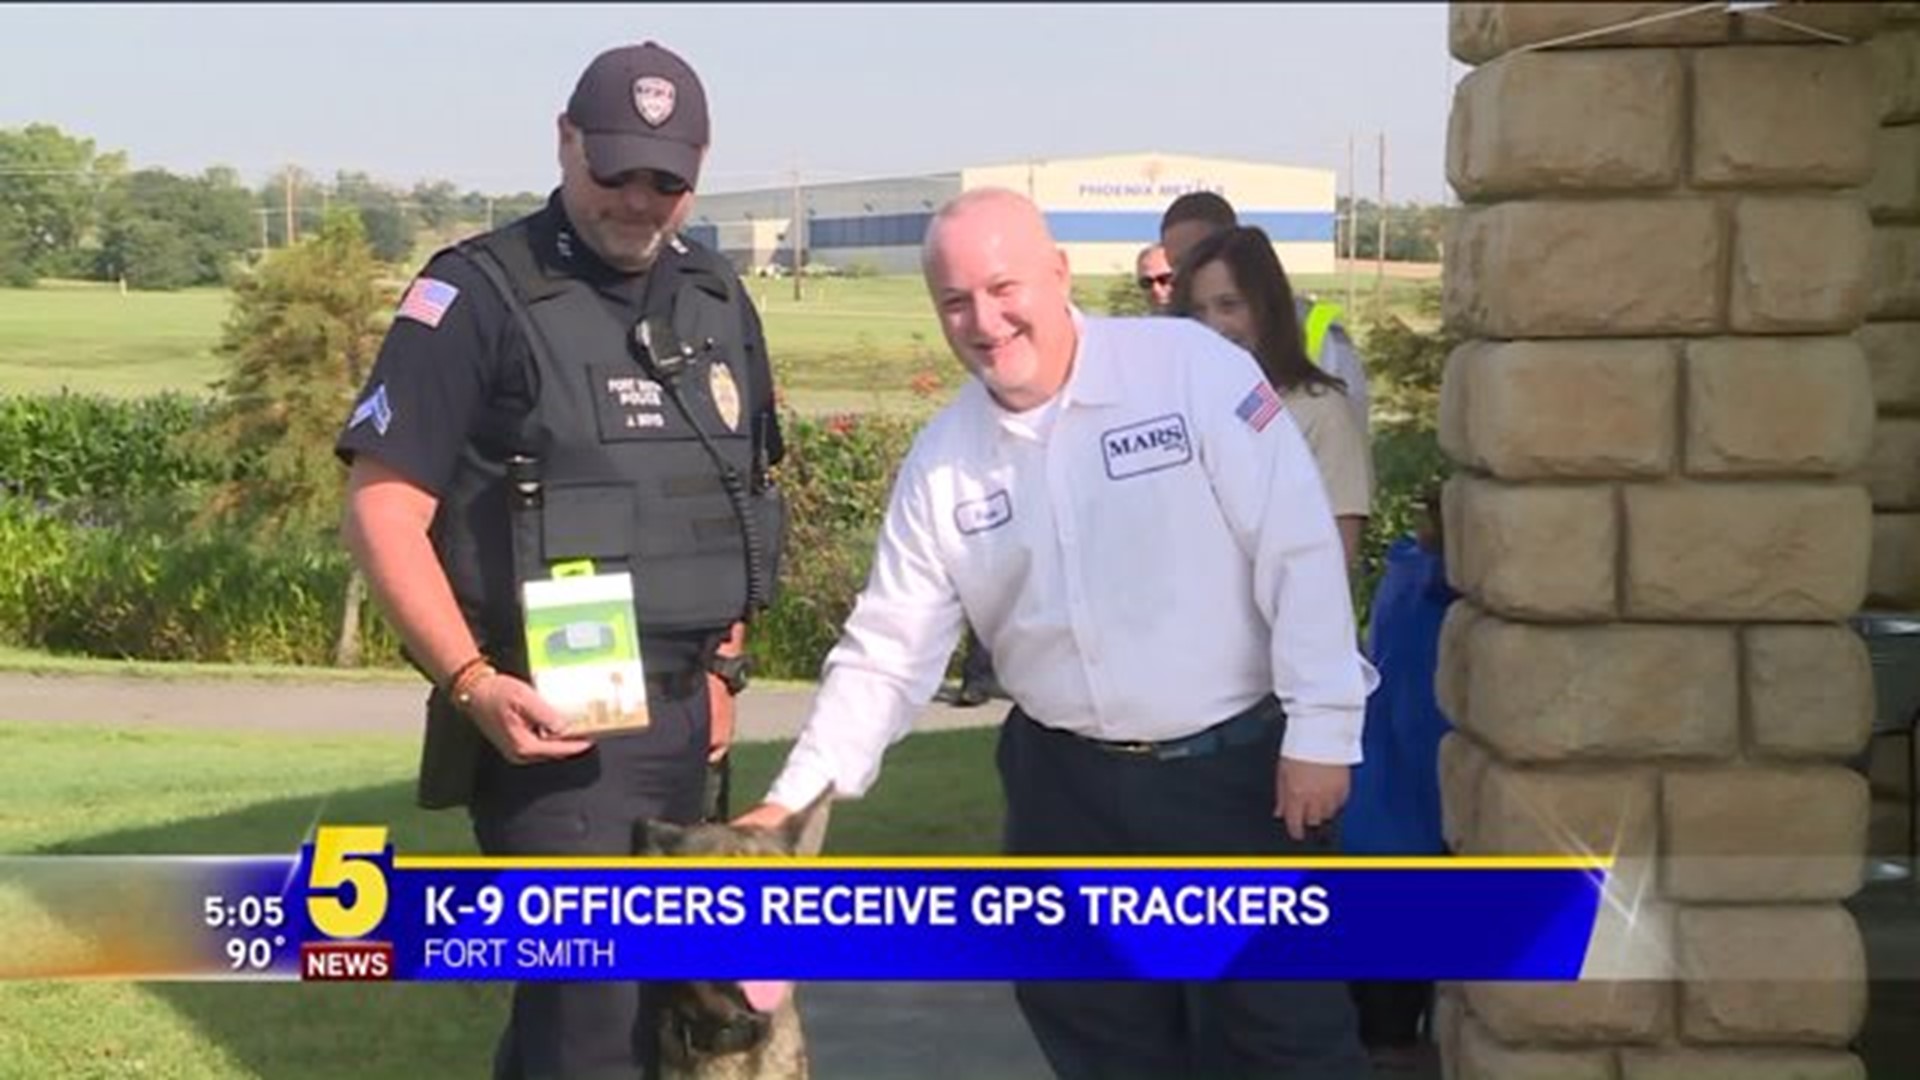 K-9 Officers Receive GPS Trackers